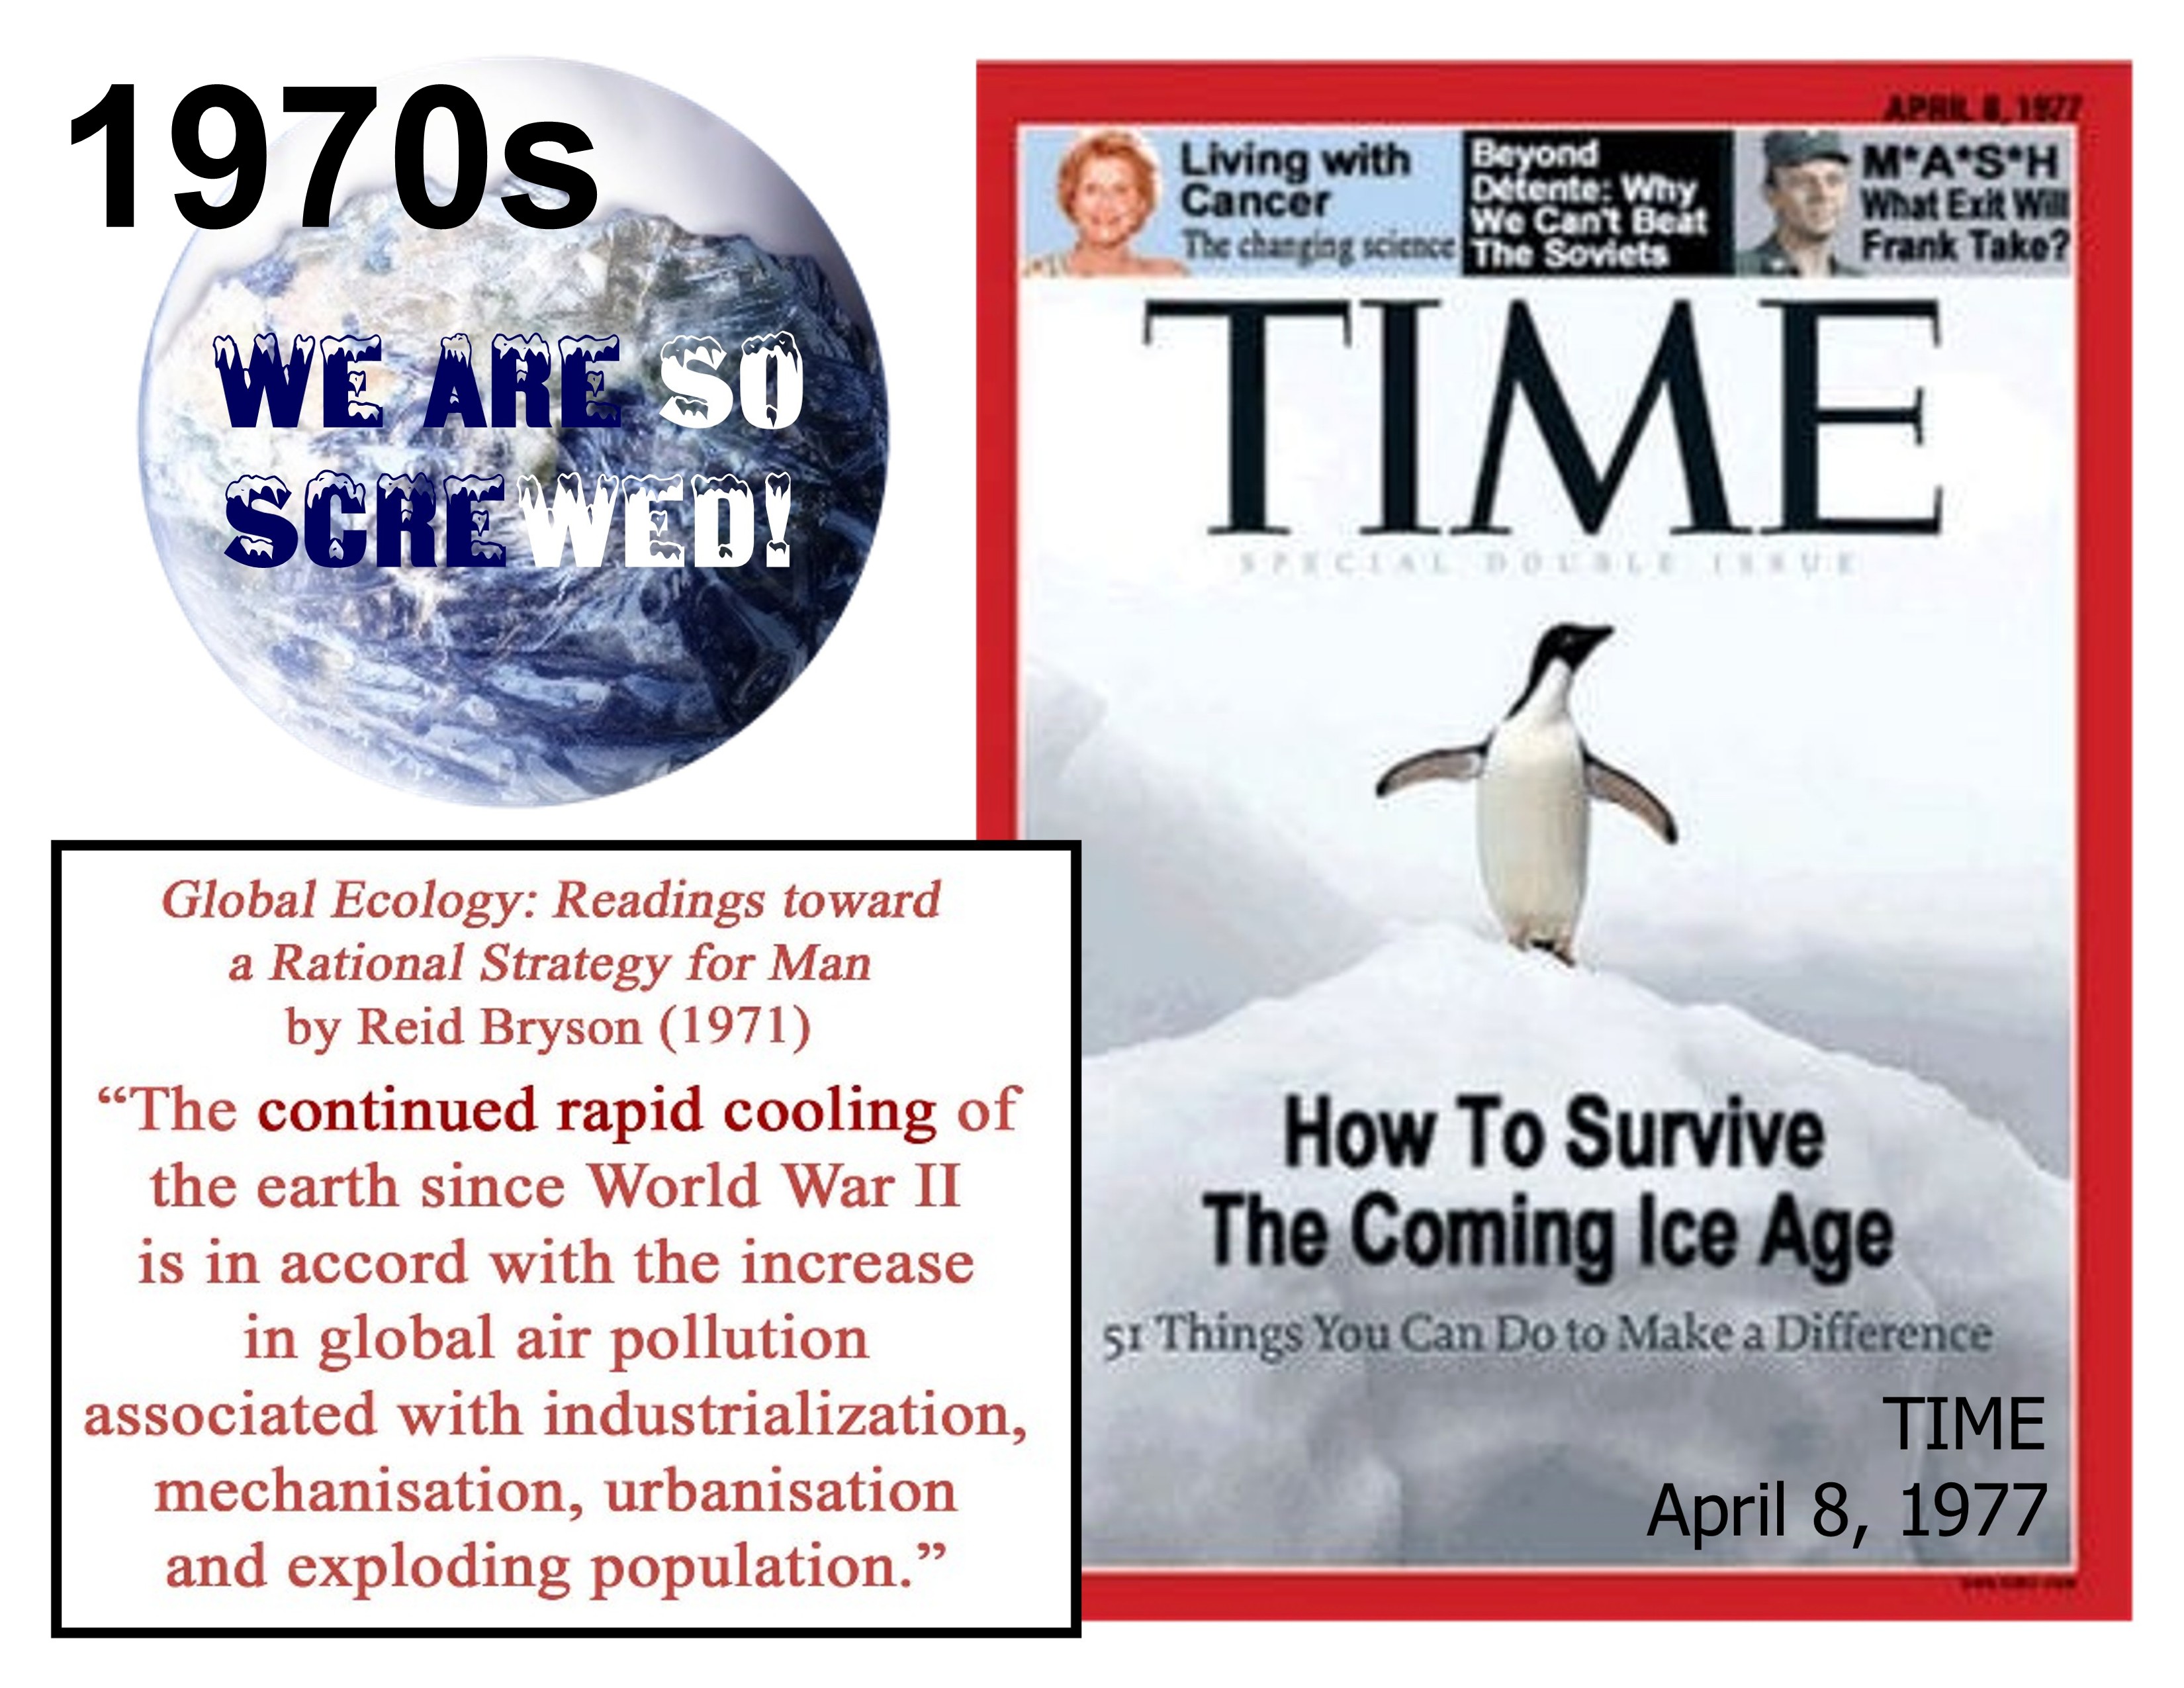 GLOBAL COOLING is coming, and we’re all DOOMED, warned NYT, WashPost, TIME, Cal Tech and the entire MSM throughout the 1970s